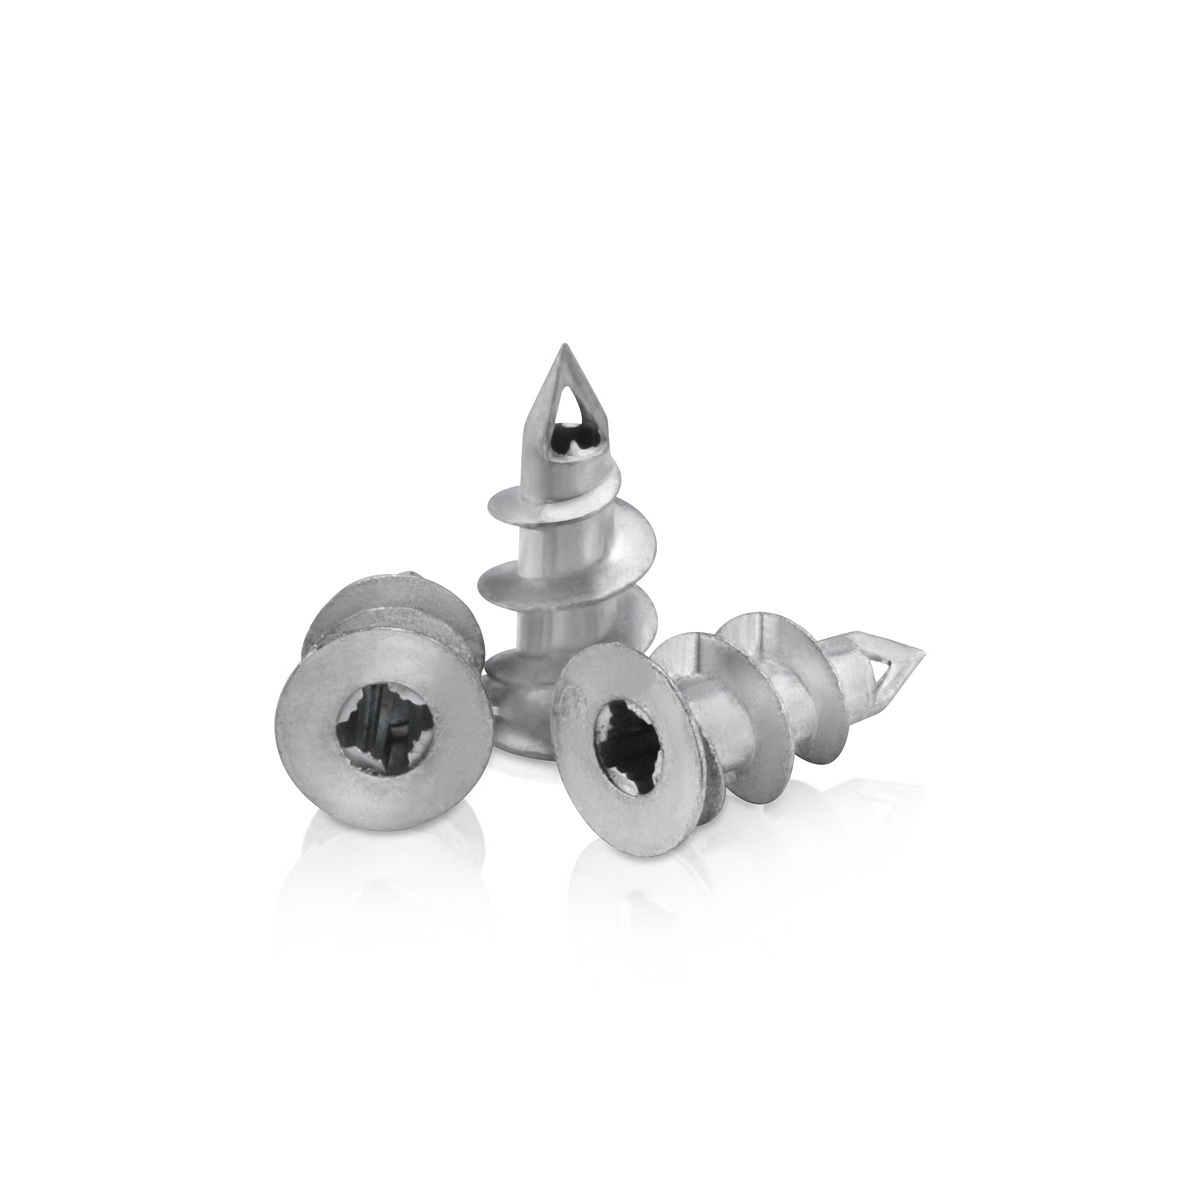 Cost Effective Small Zinc Speed Anchor for #8 Screw for Drywall